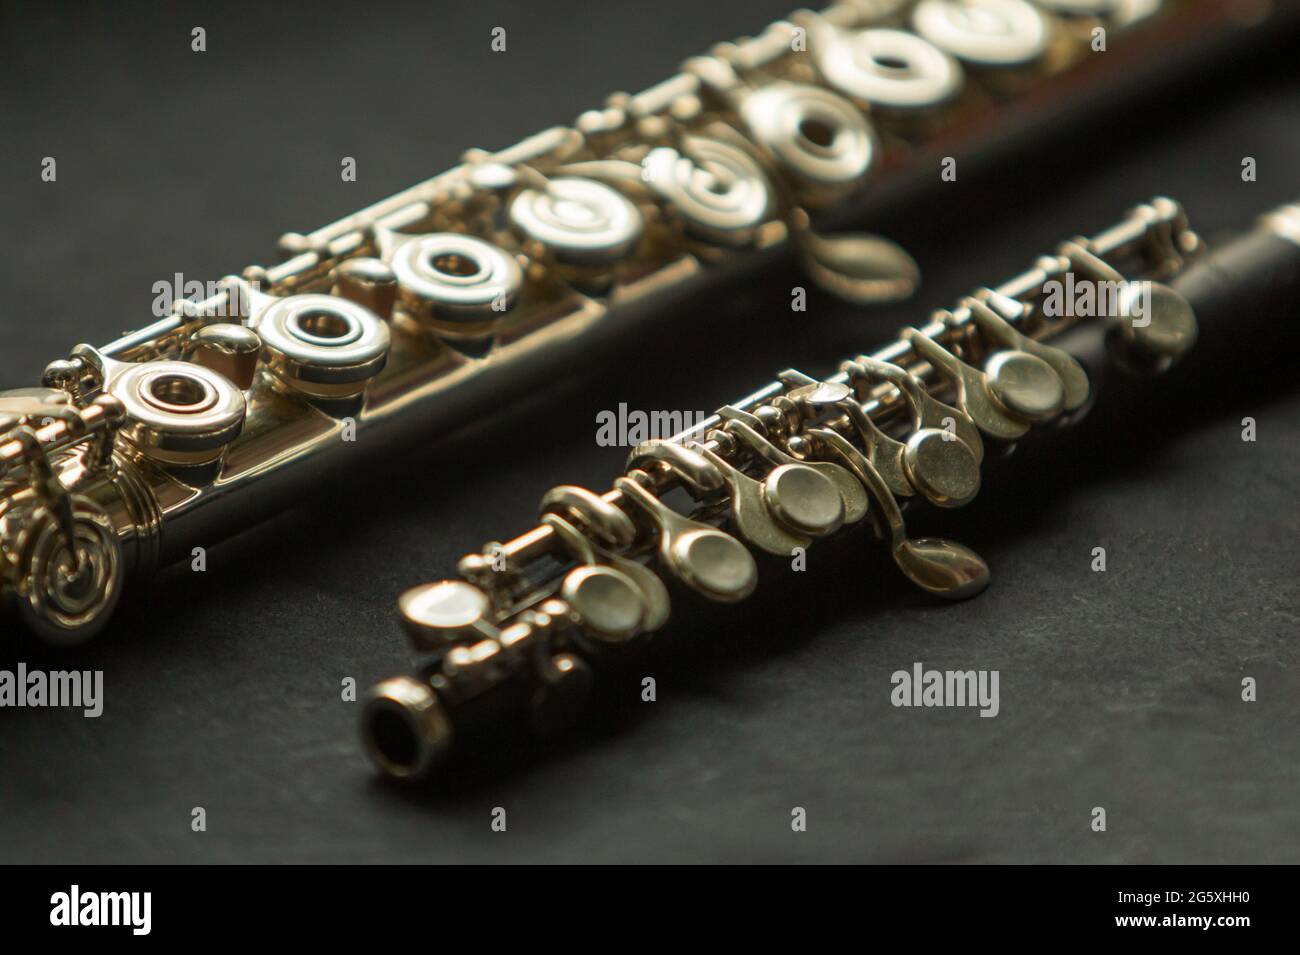 https://c8.alamy.com/comp/2G5XHH0/musical-wind-instrument-piccolo-flute-and-brass-flute-2G5XHH0.jpg